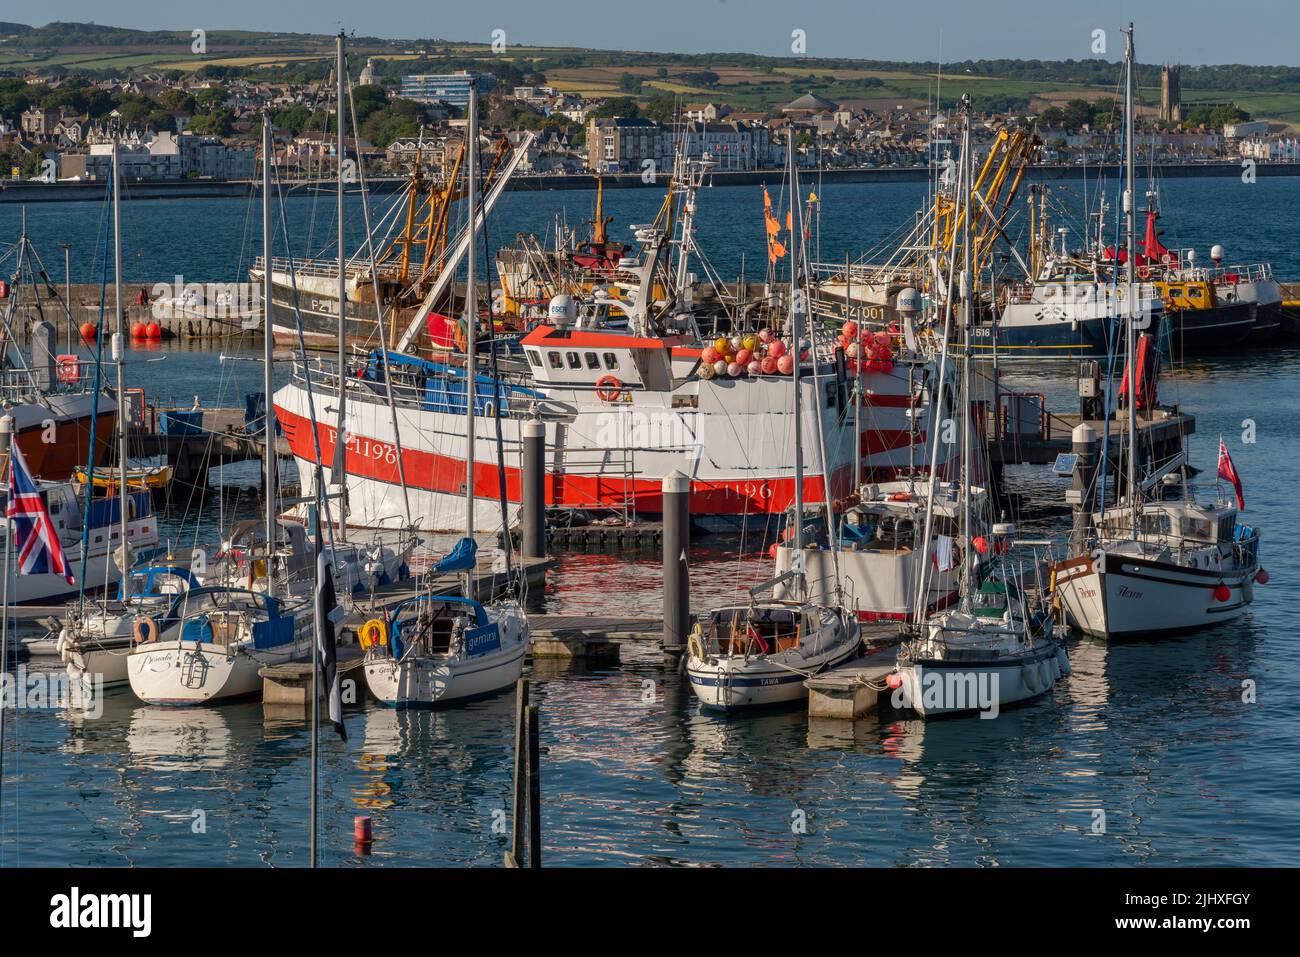 Newlyn Harbour, Penzance, Cornwall, England, UK. 2022. Commercial fishing boats and leisure craft in port at Newlyn Harbour, Stock Photo